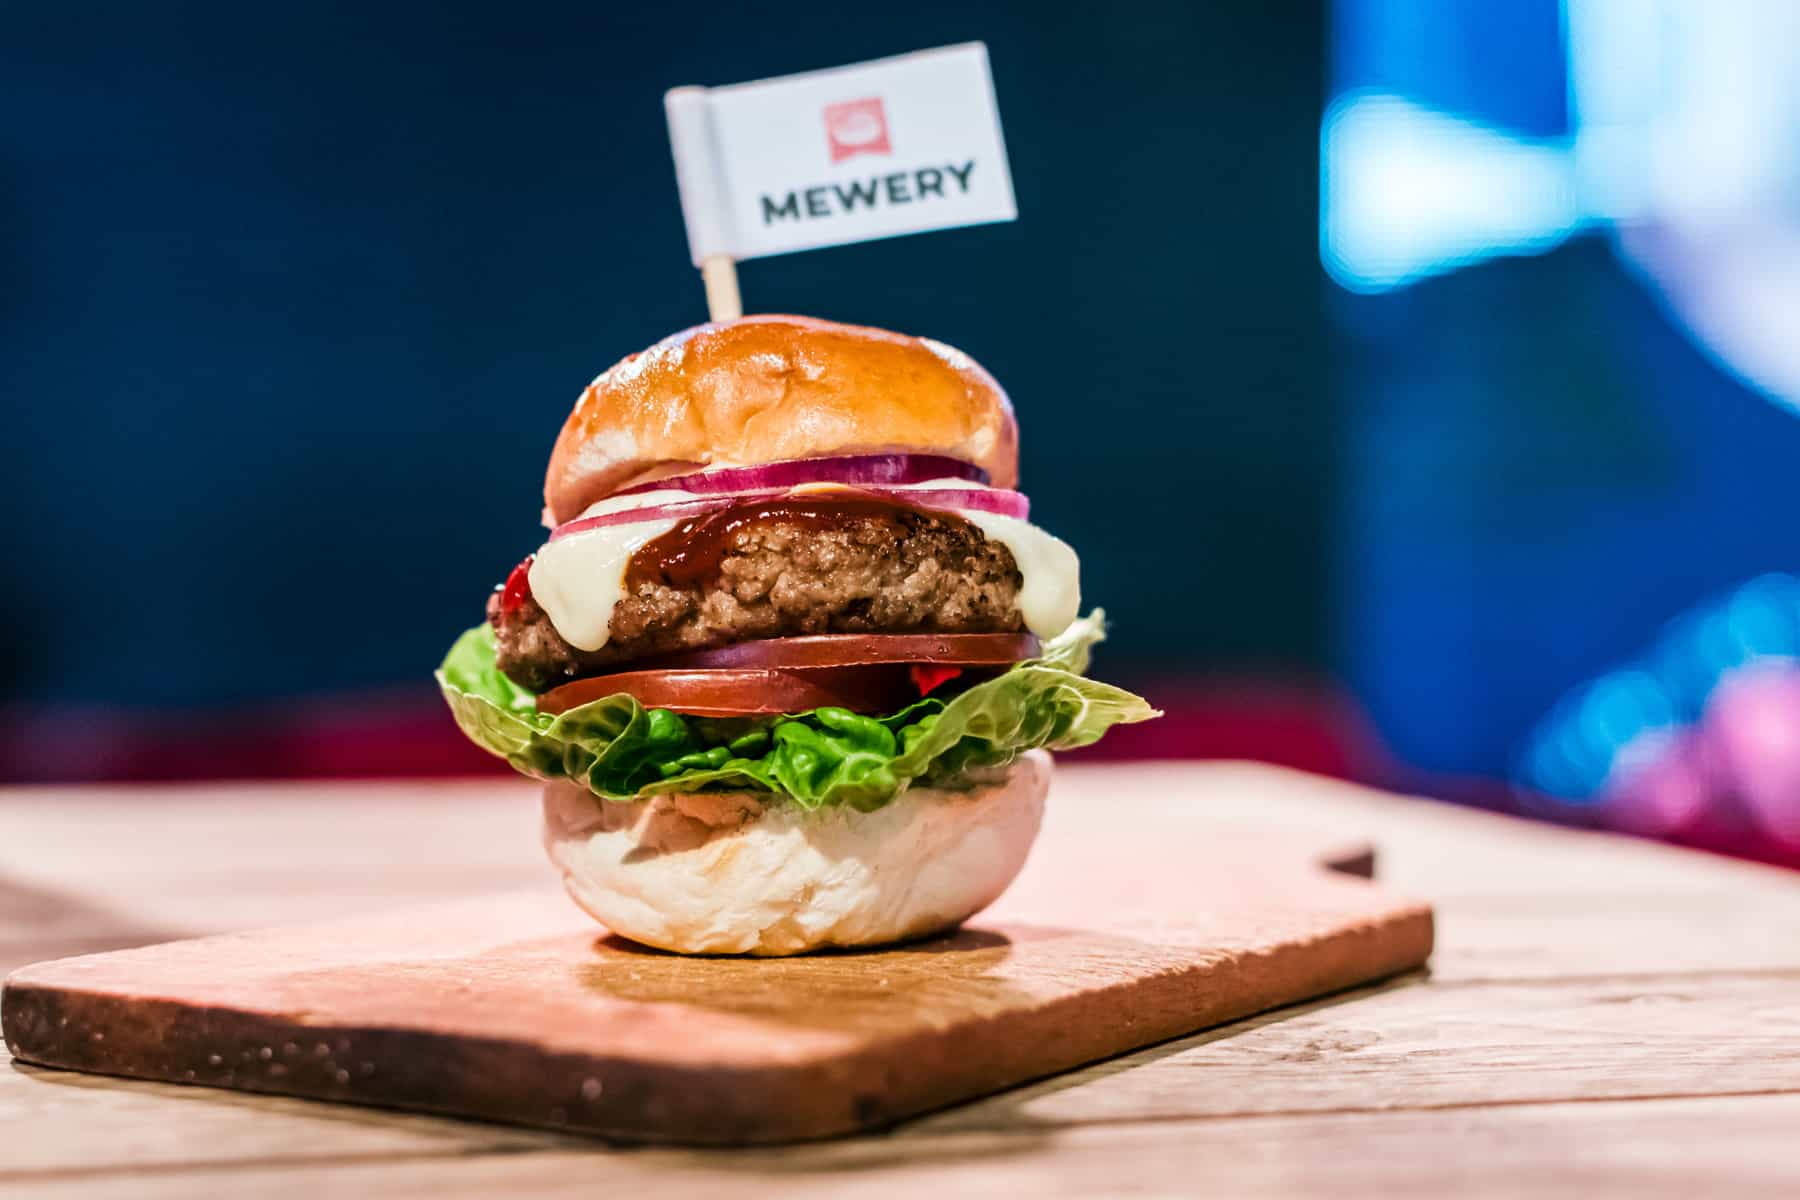 Merry unveils the "first-ever" pork and micro algae cells burger